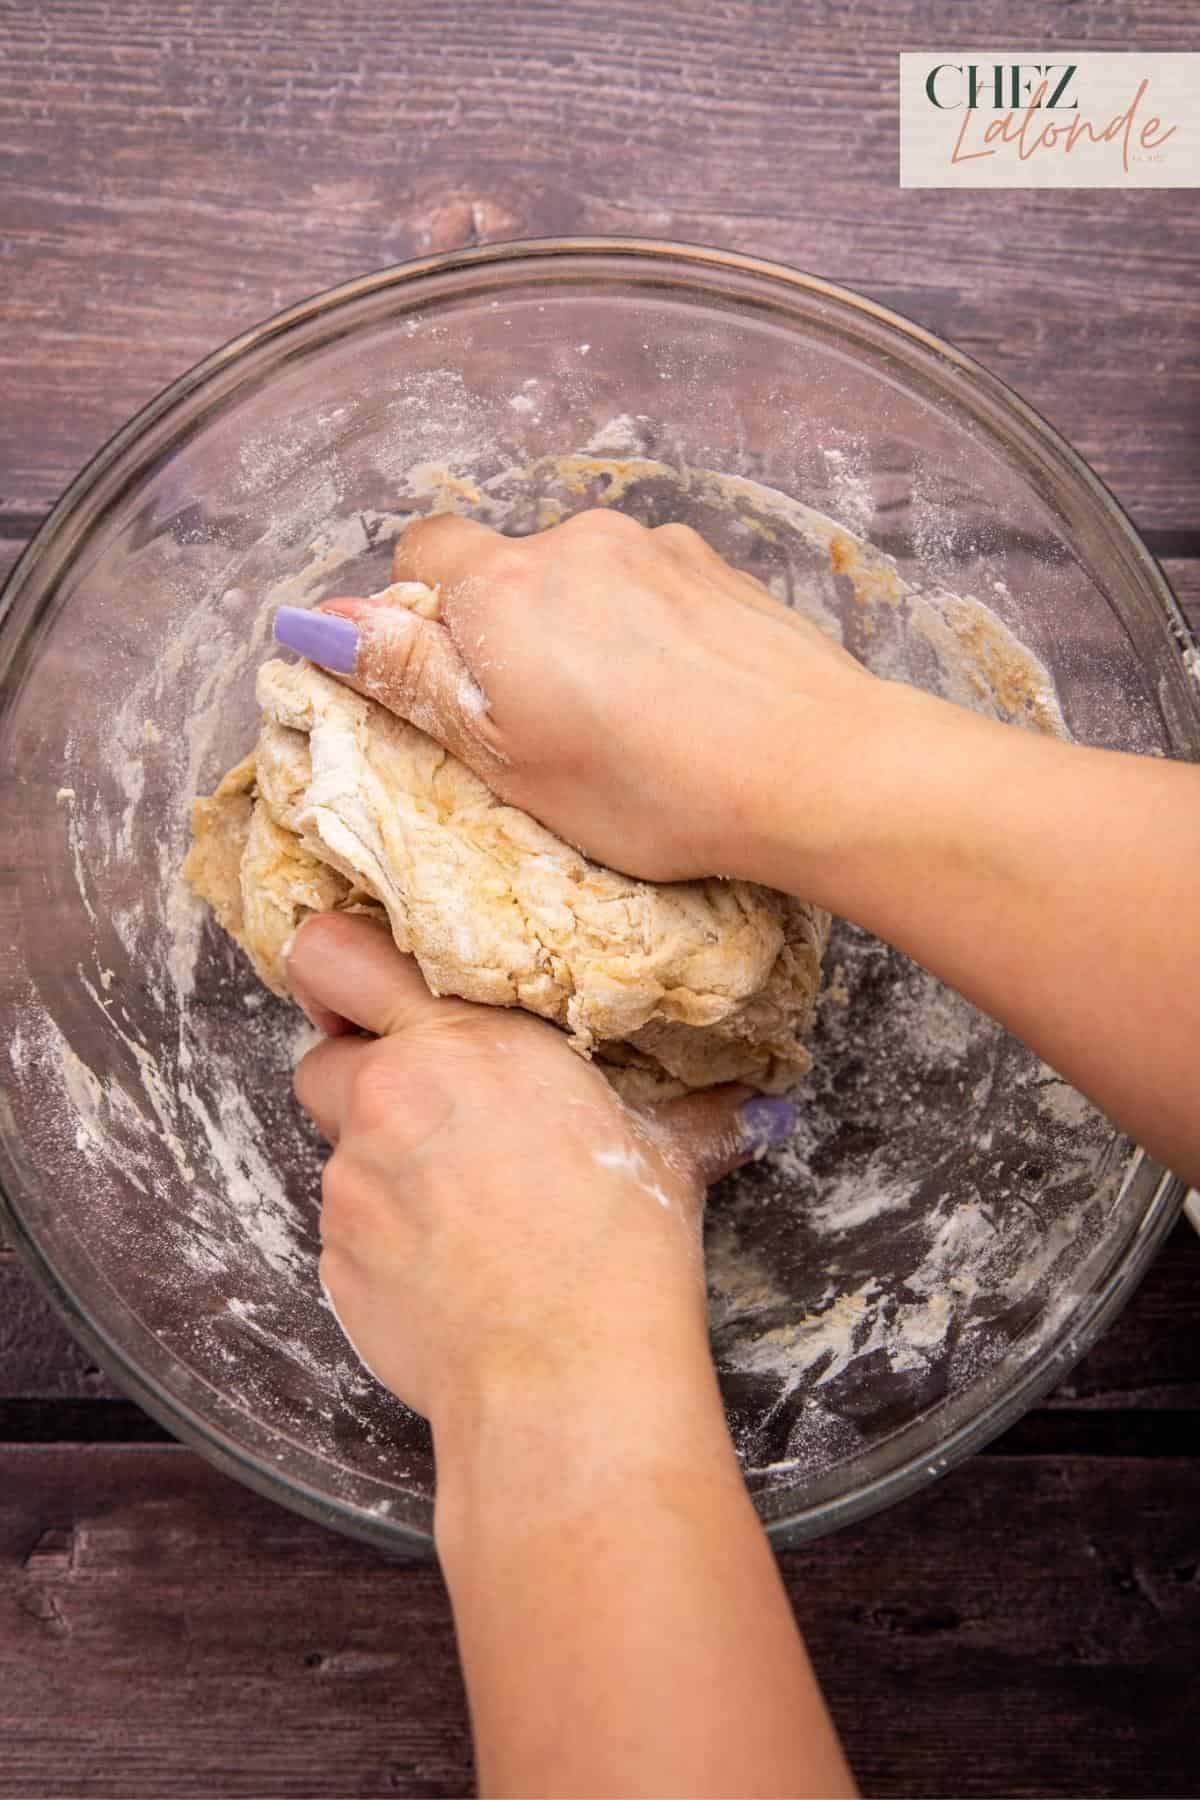 After incorporating the mixture, continue kneading the dough by hand for a minute or two until the texture becomes less tacky.